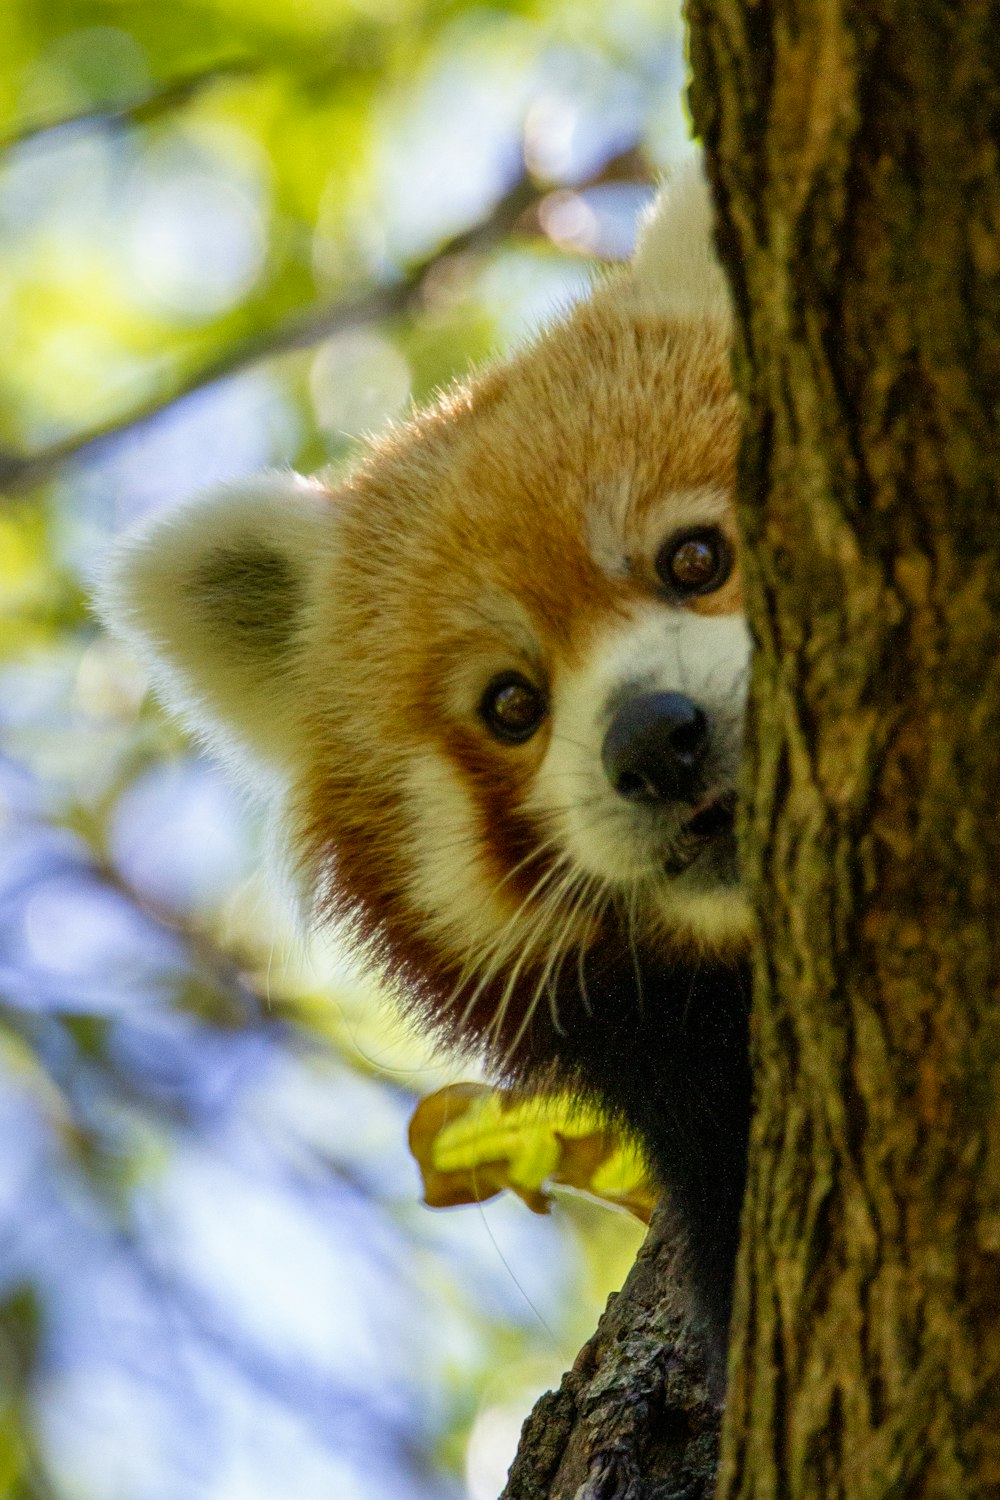 a close up of a small animal on a tree